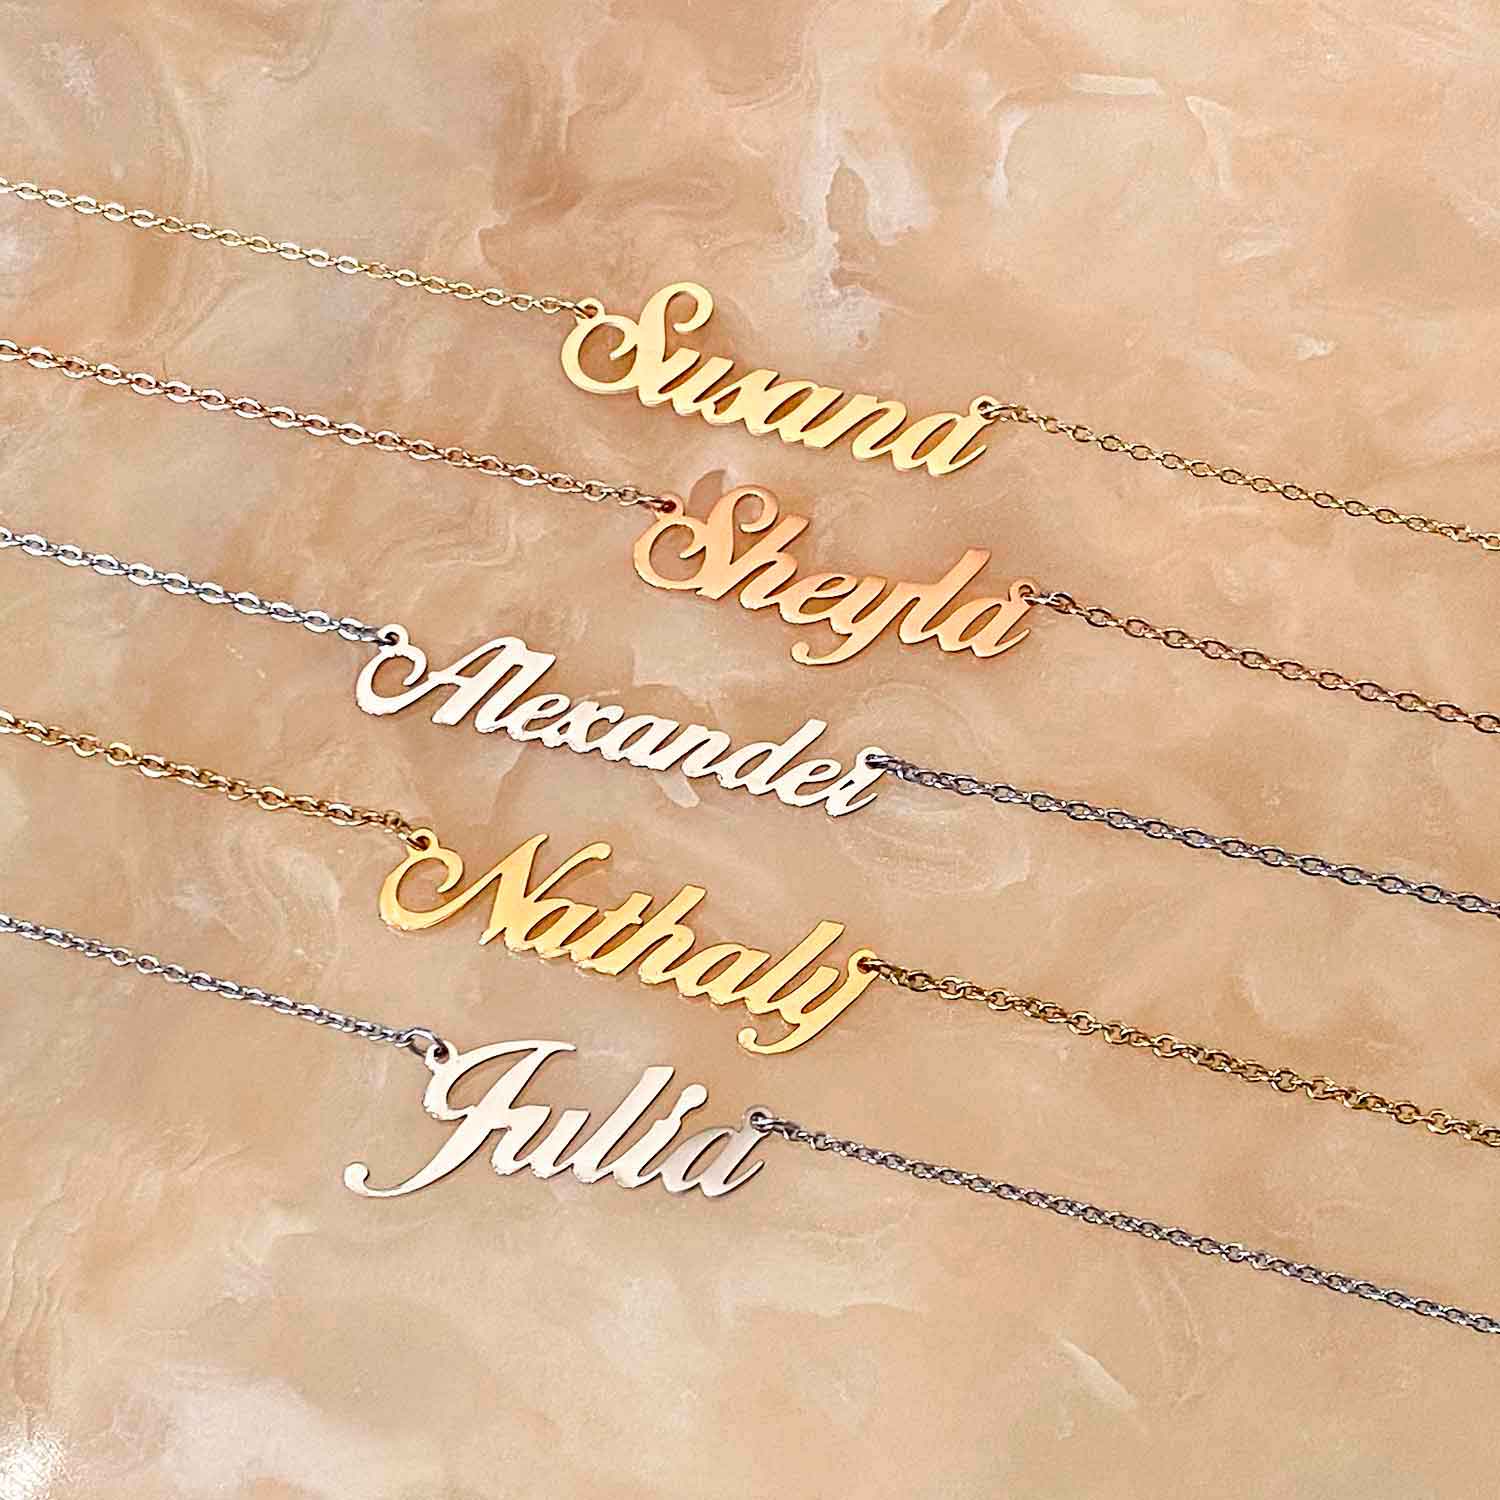 Glow Up Name Necklaces Custom Name Necklace